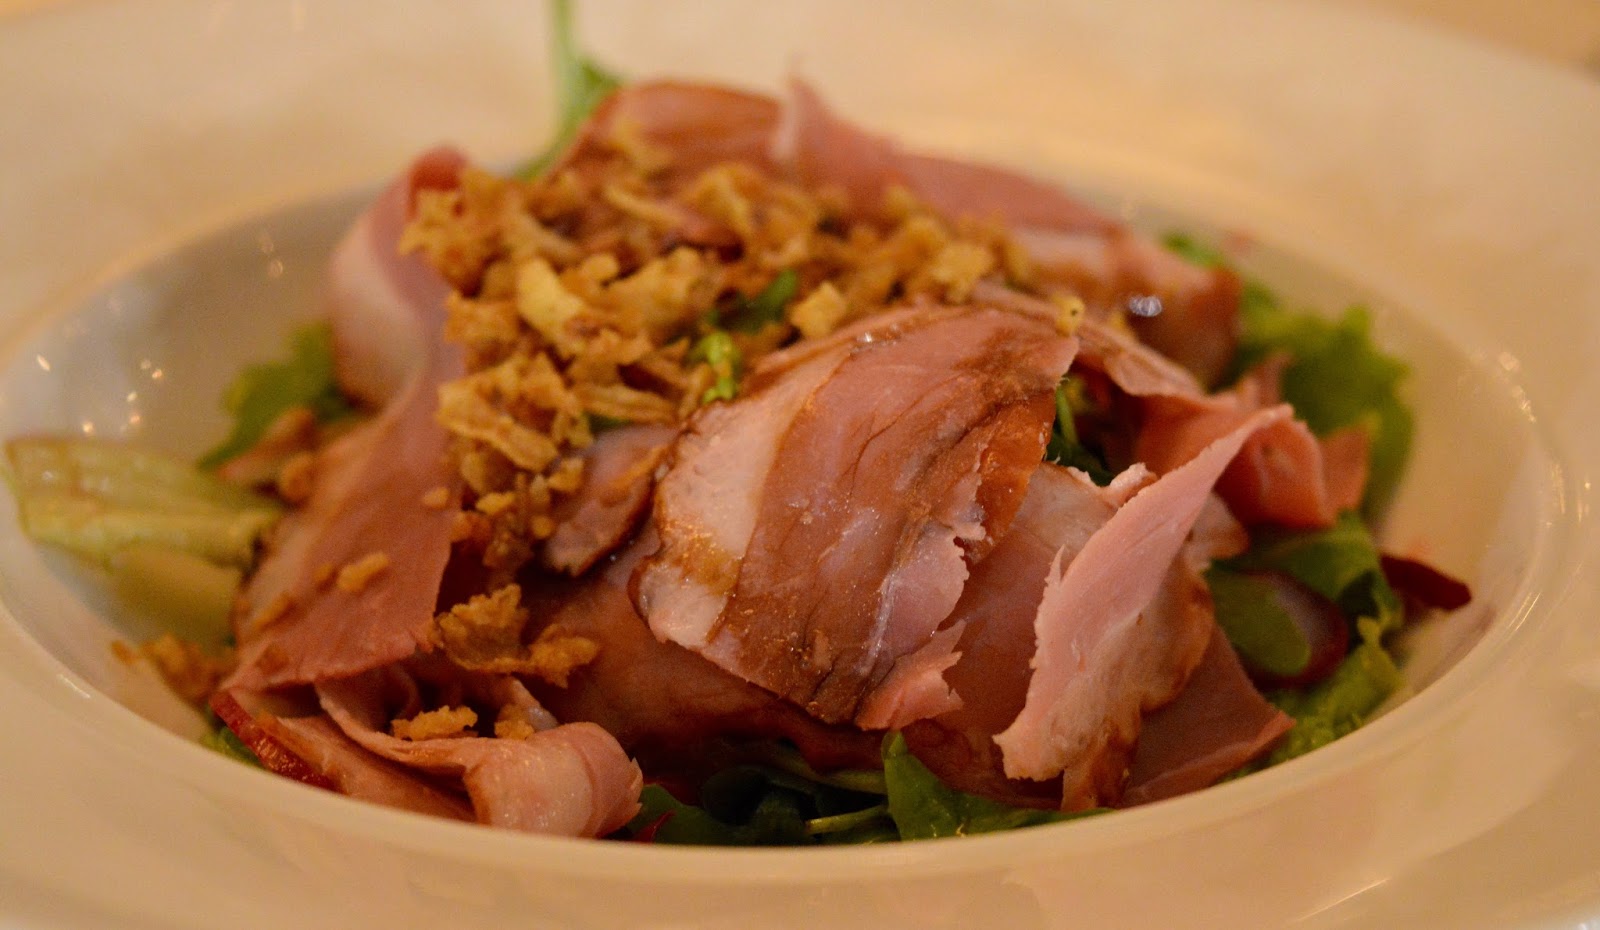 Celebrate Christmas at Newcastle Gusto  - Smoked duck salad starter